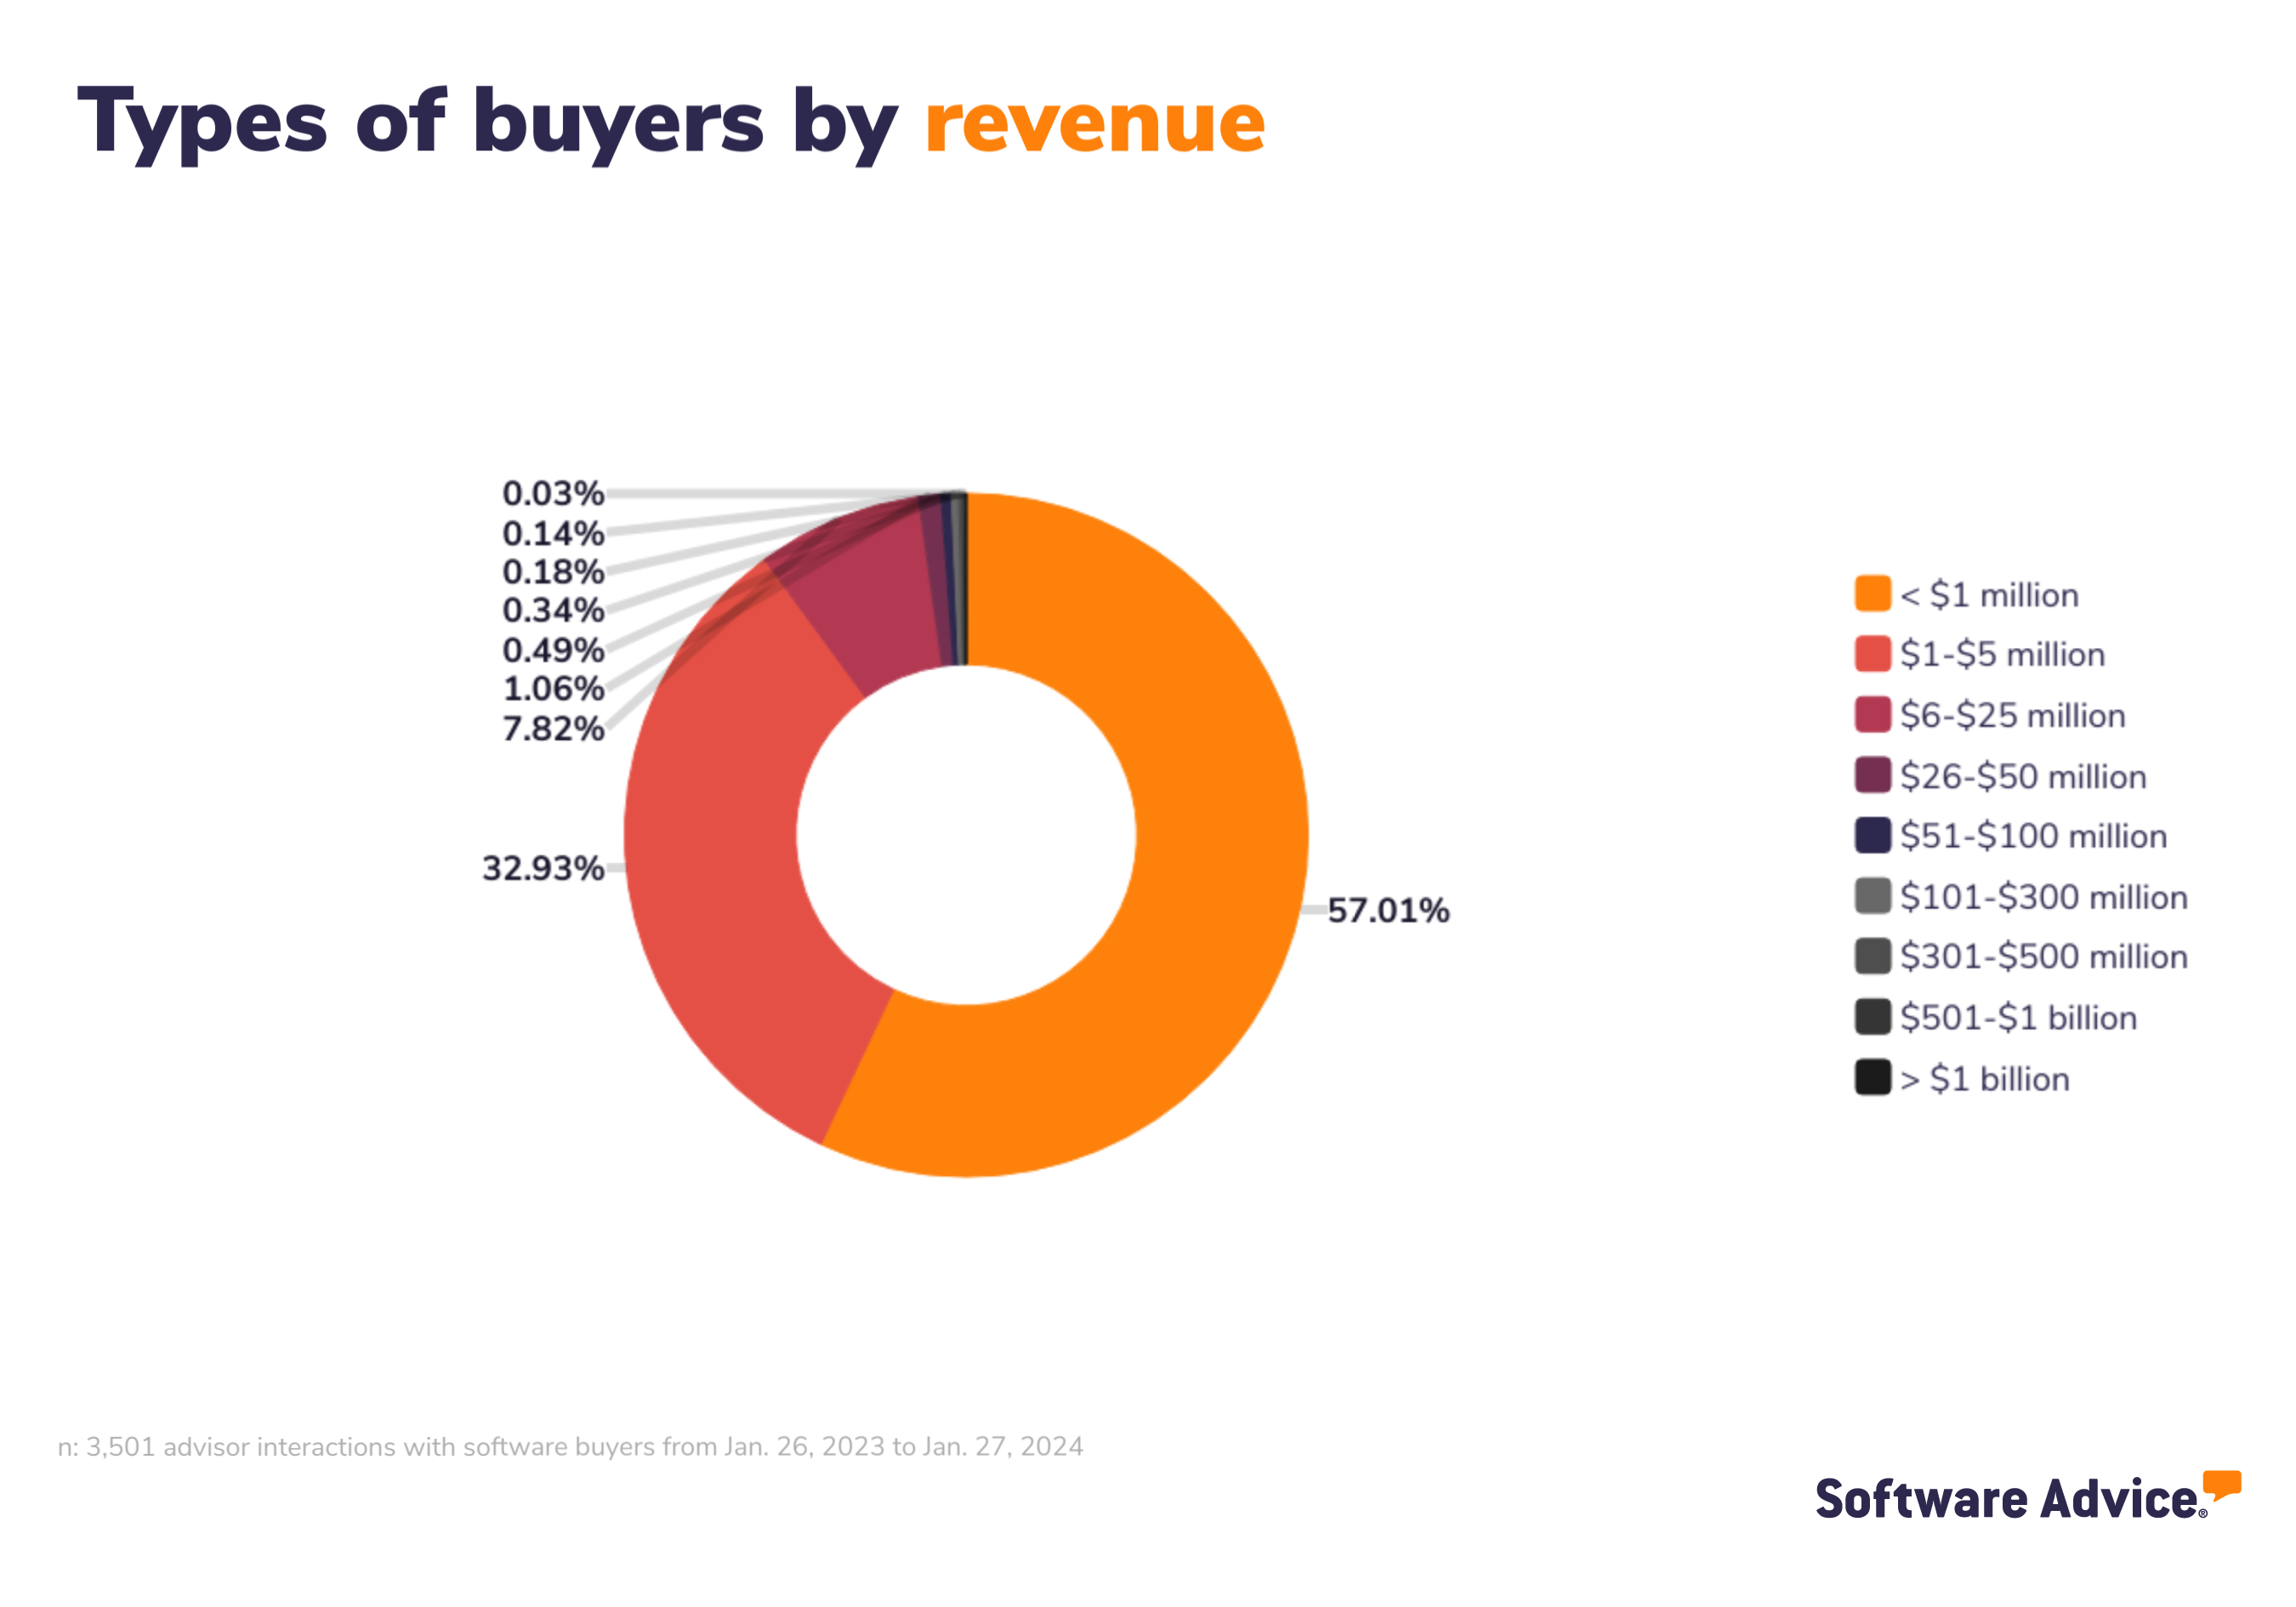 Software Advice graphic: Types of buyers by revenue